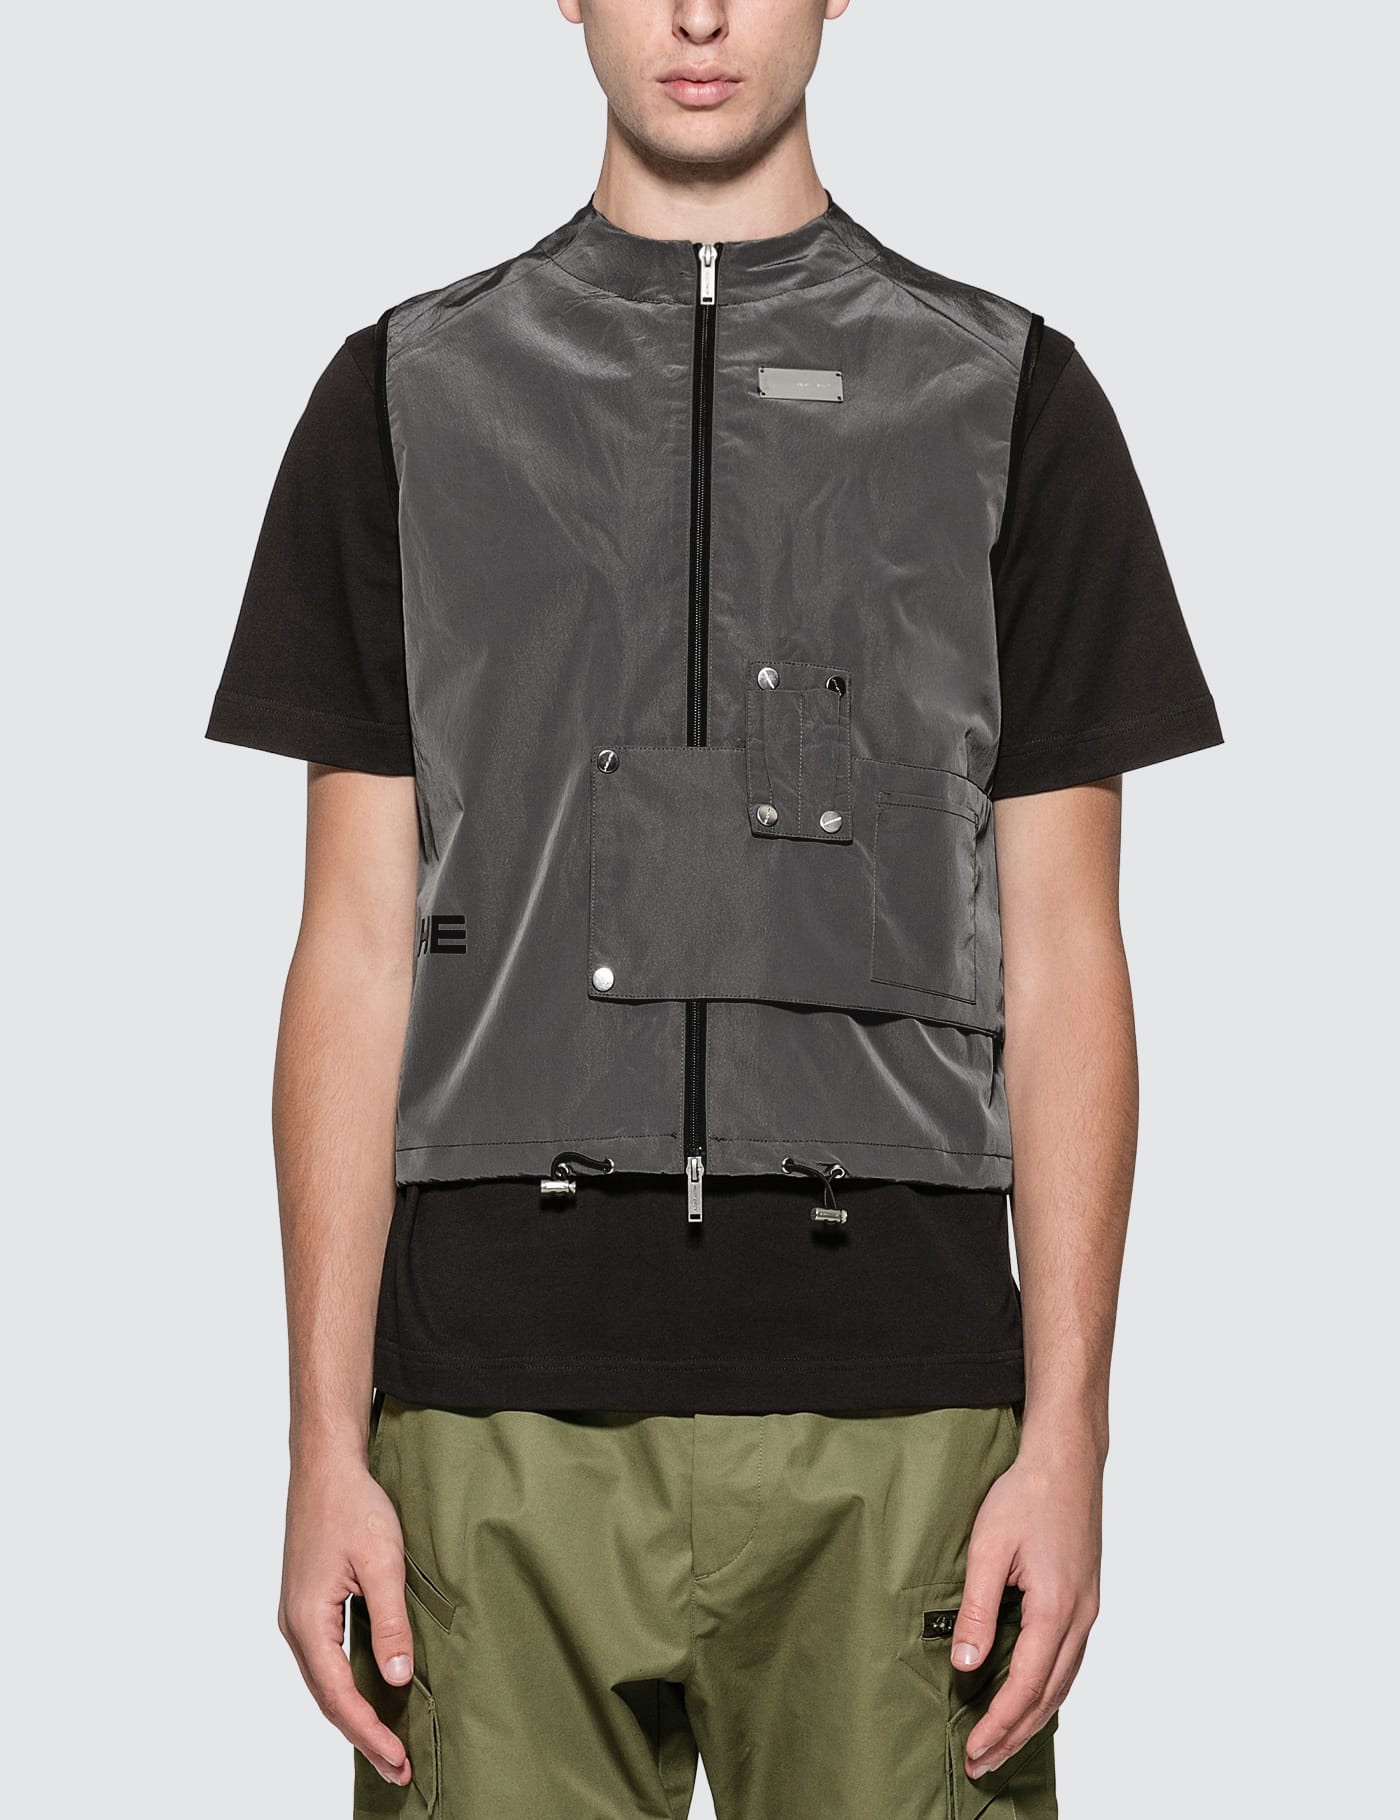 Heliot Emil - Technical Vest | HBX - Globally Curated Fashion and